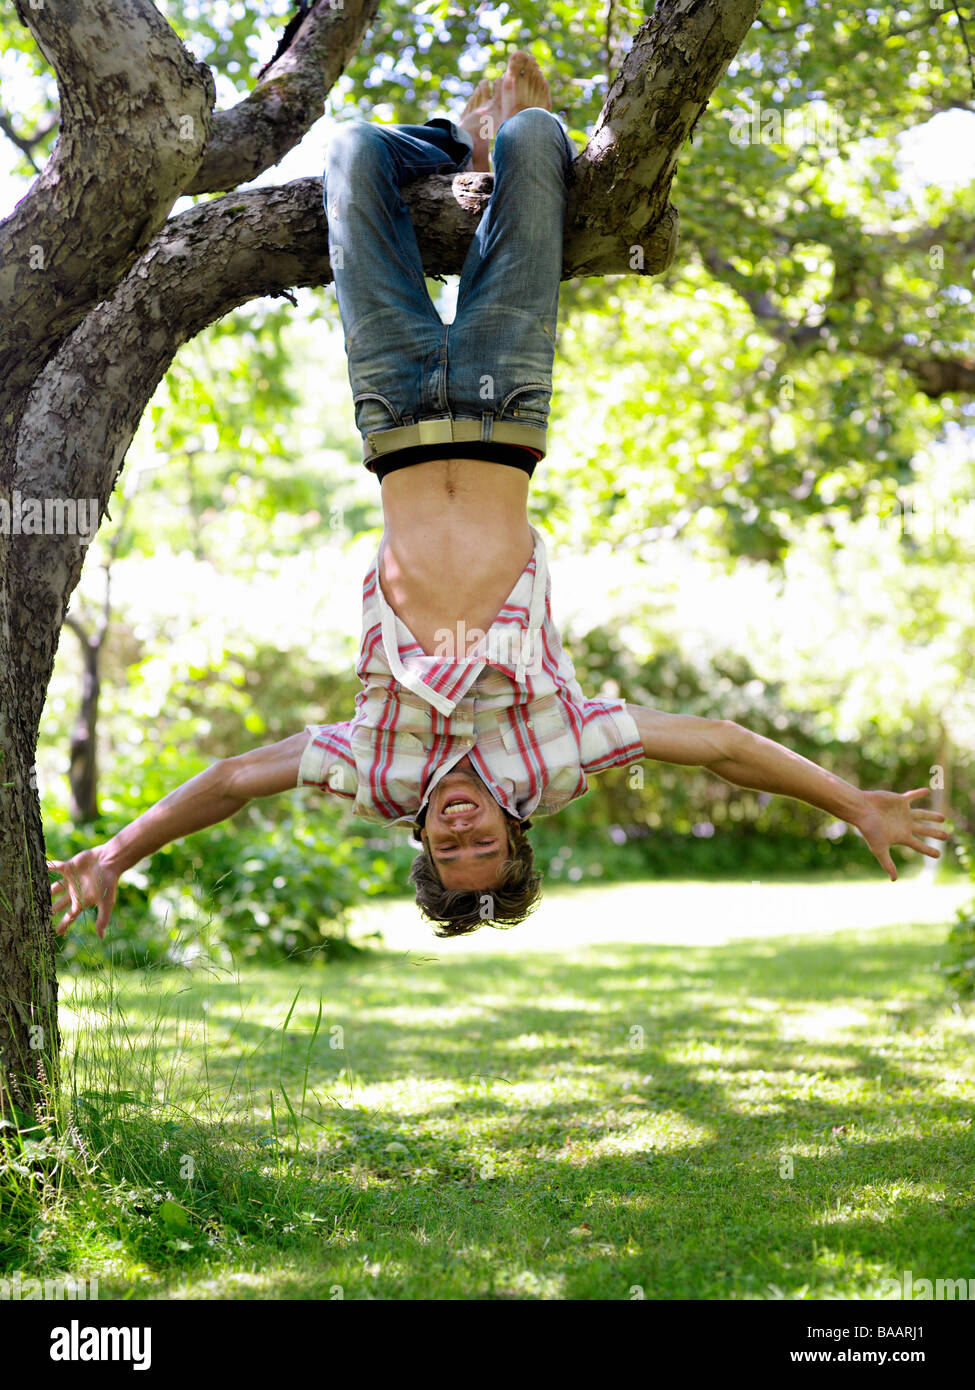 A man hanging upside down on a tree branch, Stockholom, Sweden. Stock Photo